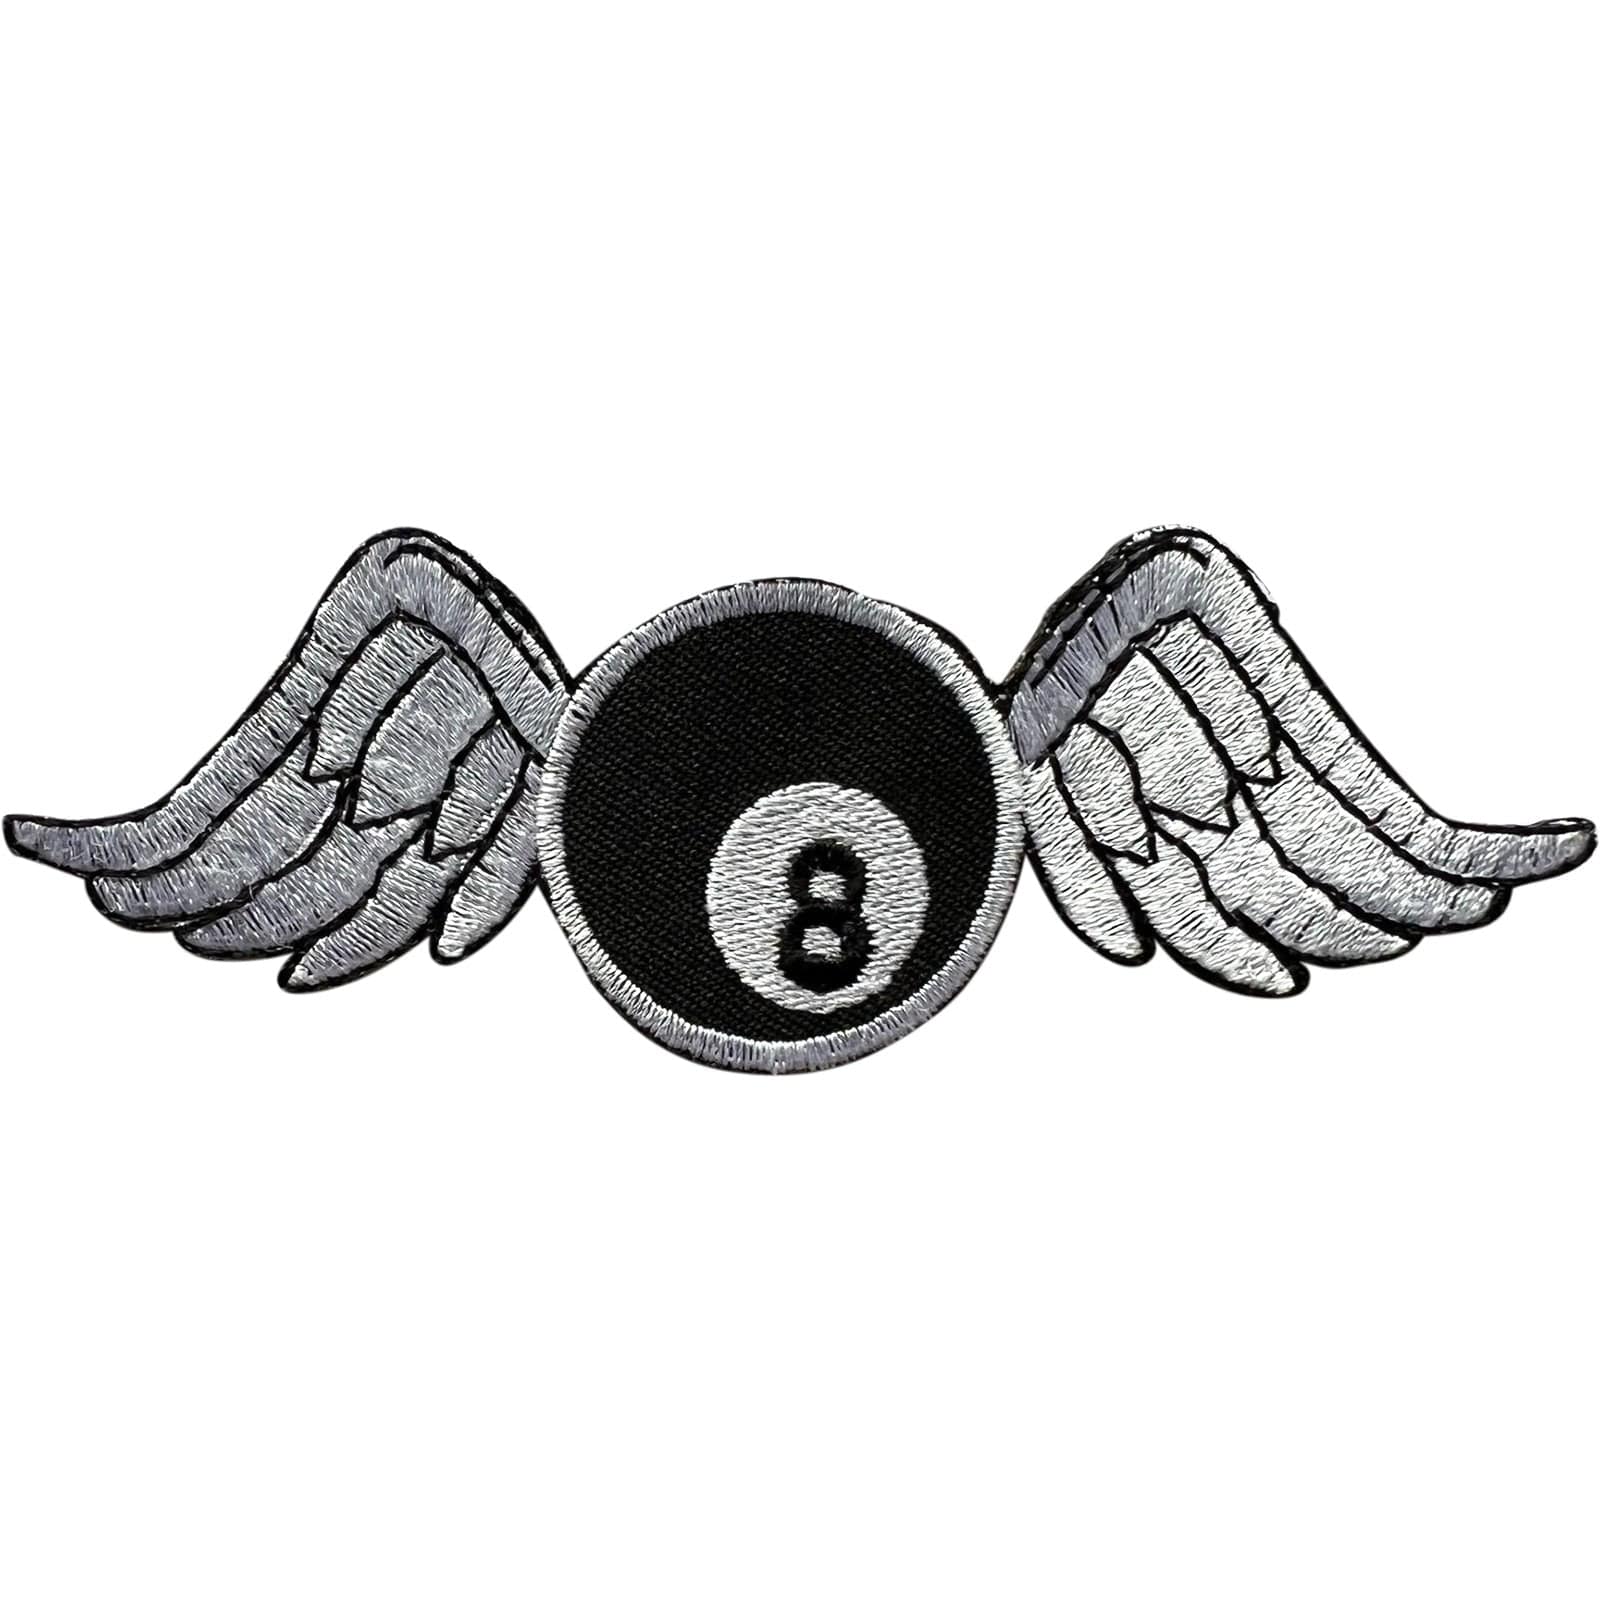 Lucky 8 Ball Wings Patch Iron On Sew On Billiards Pool Snooker Embroidered Badge